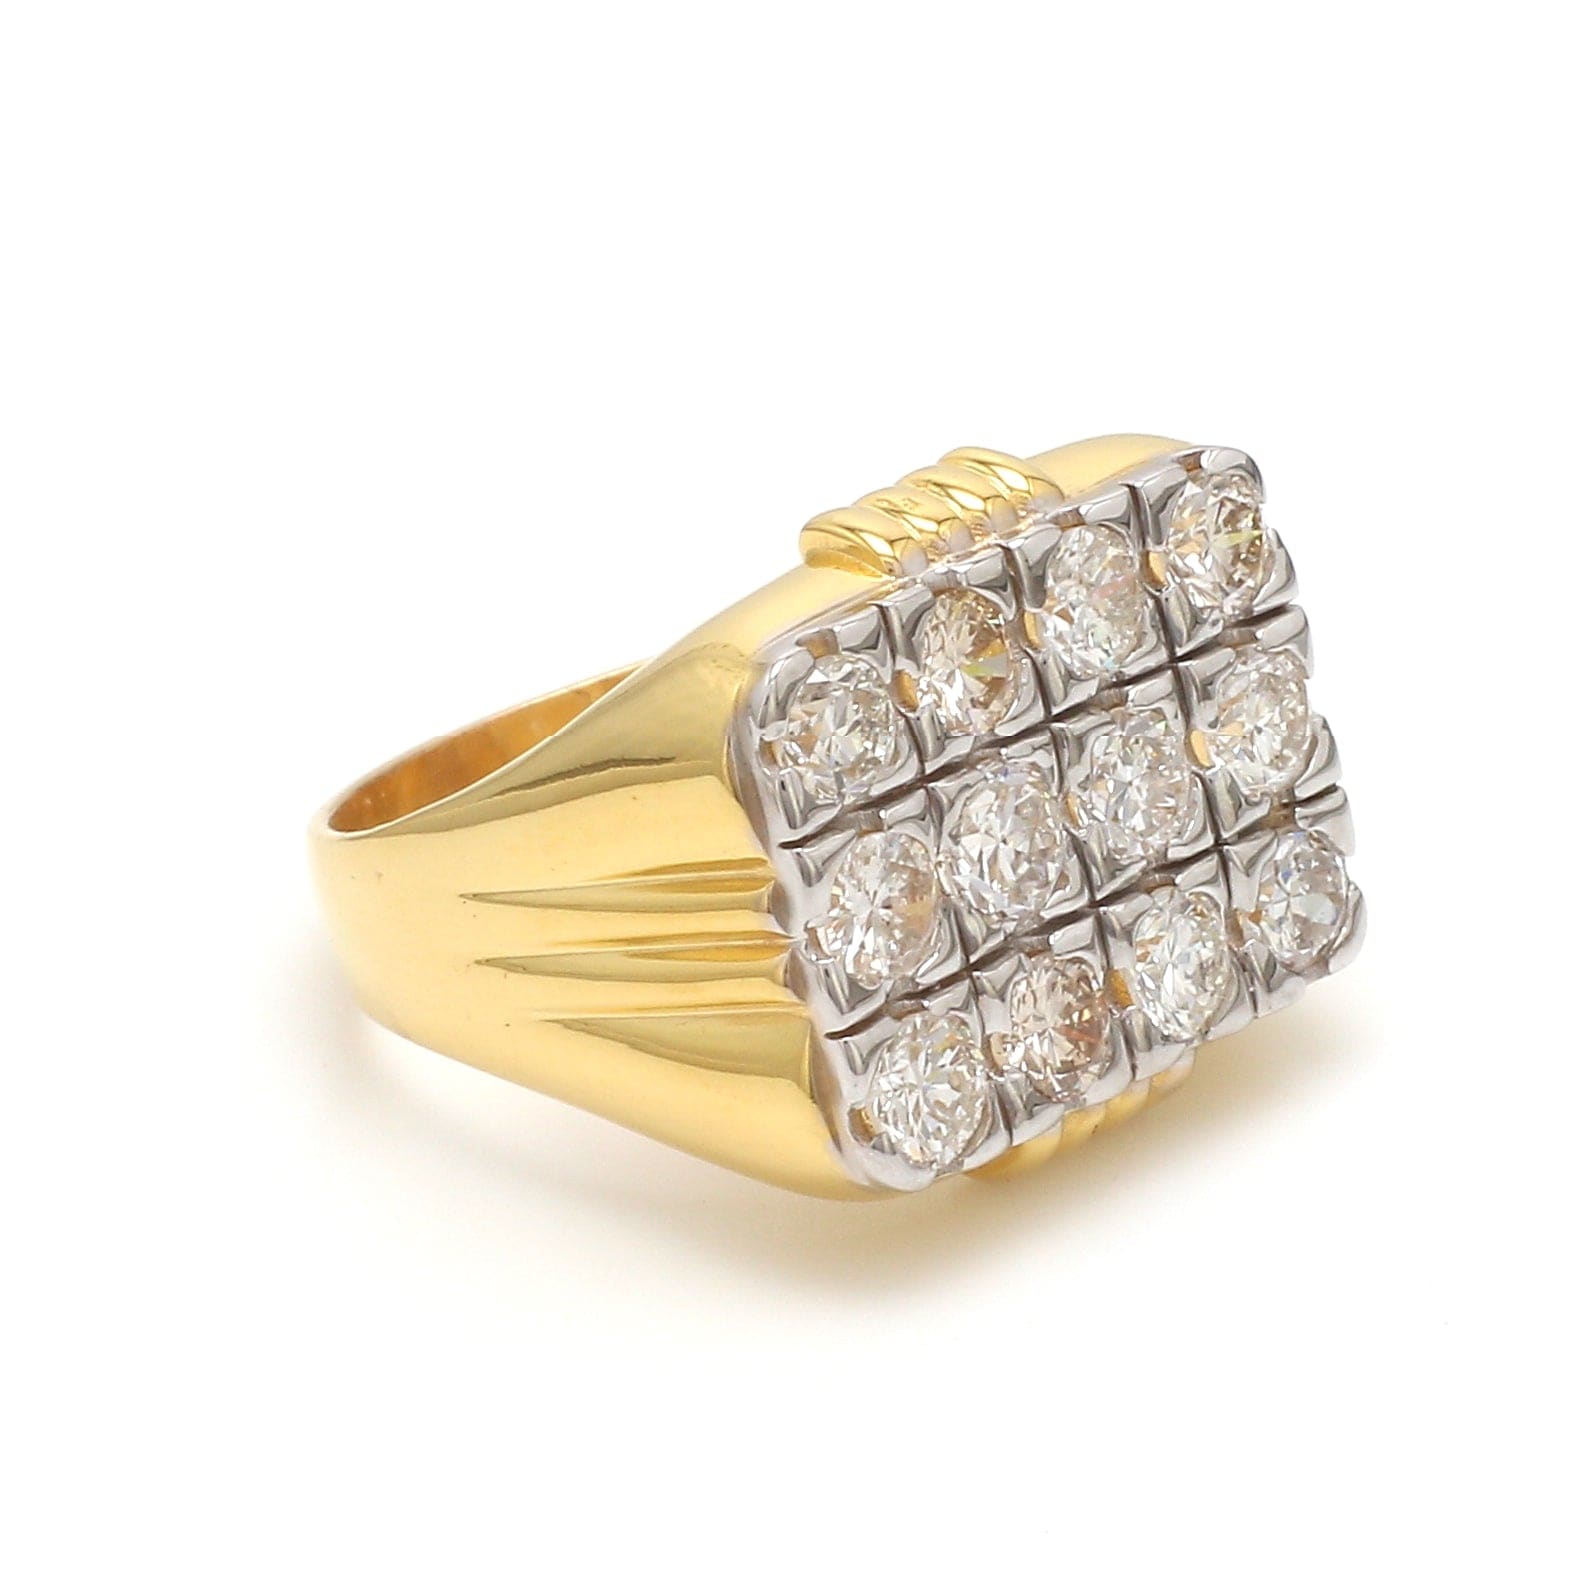 Modern Luxury Engagement Rings for Women - A.JAFFE